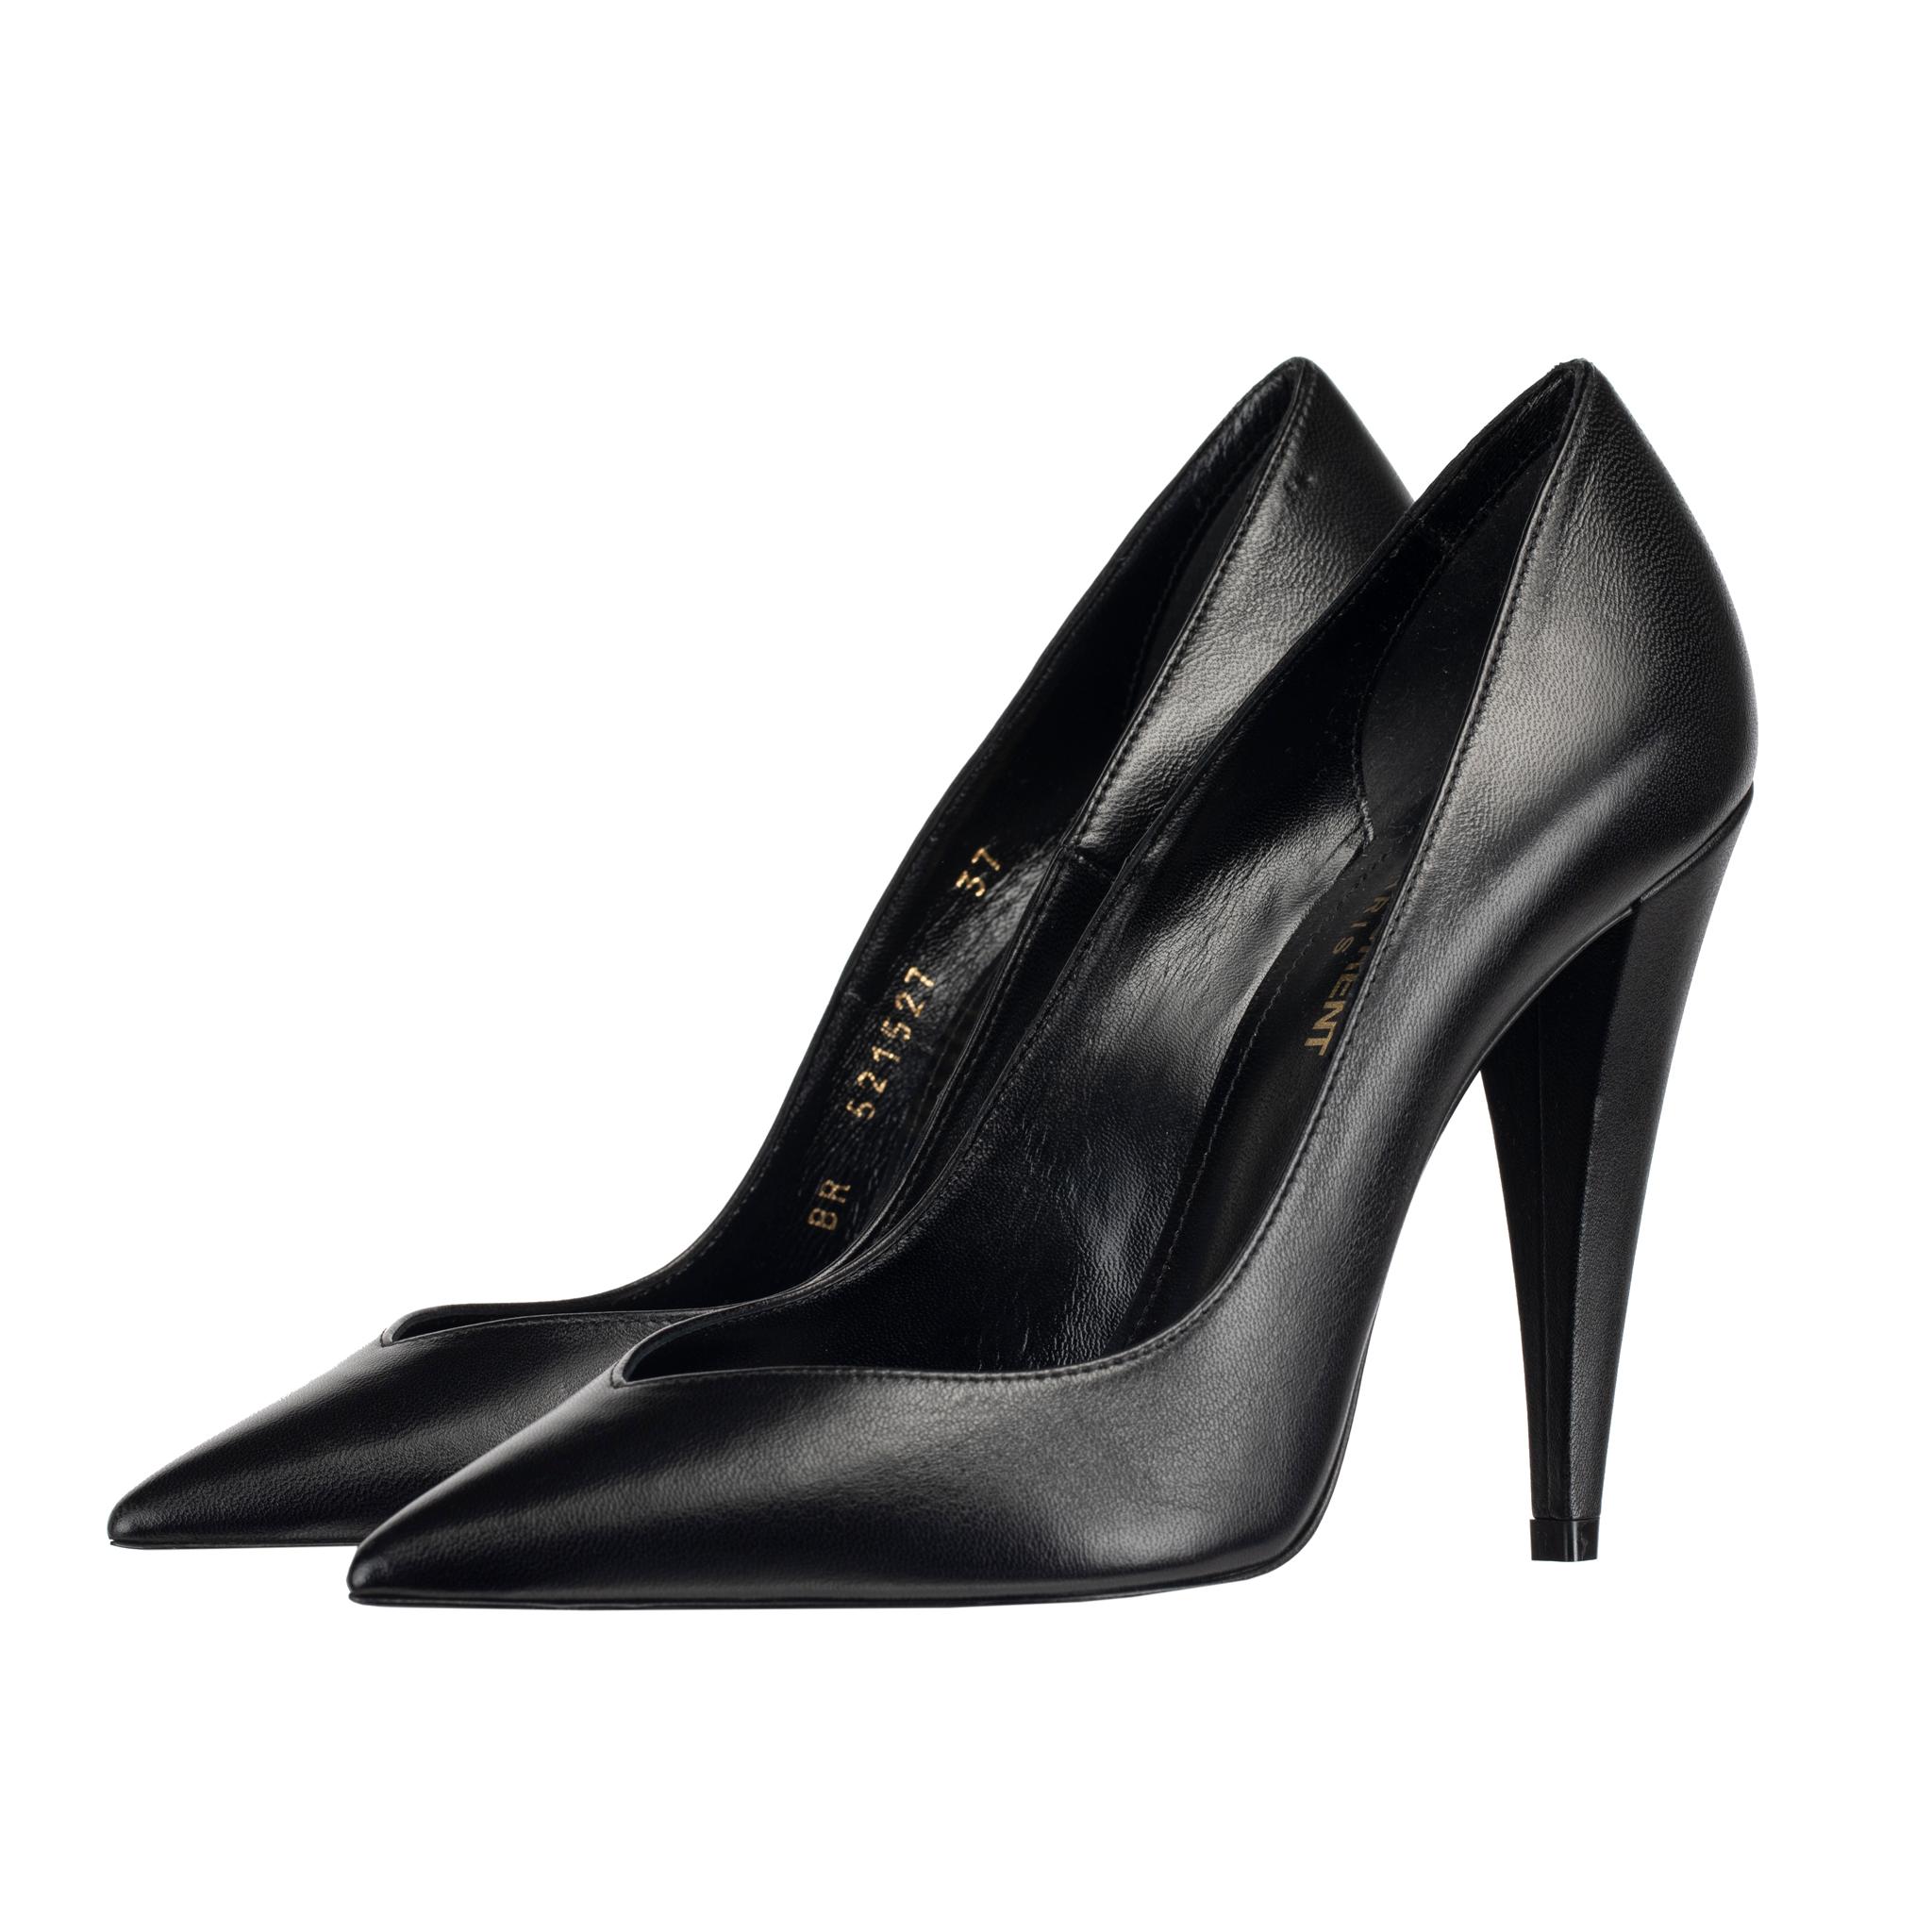 Yves Saint Laurent Decollete Era Black Leather Pumps 39 FR In New Condition For Sale In DOUBLE BAY, NSW